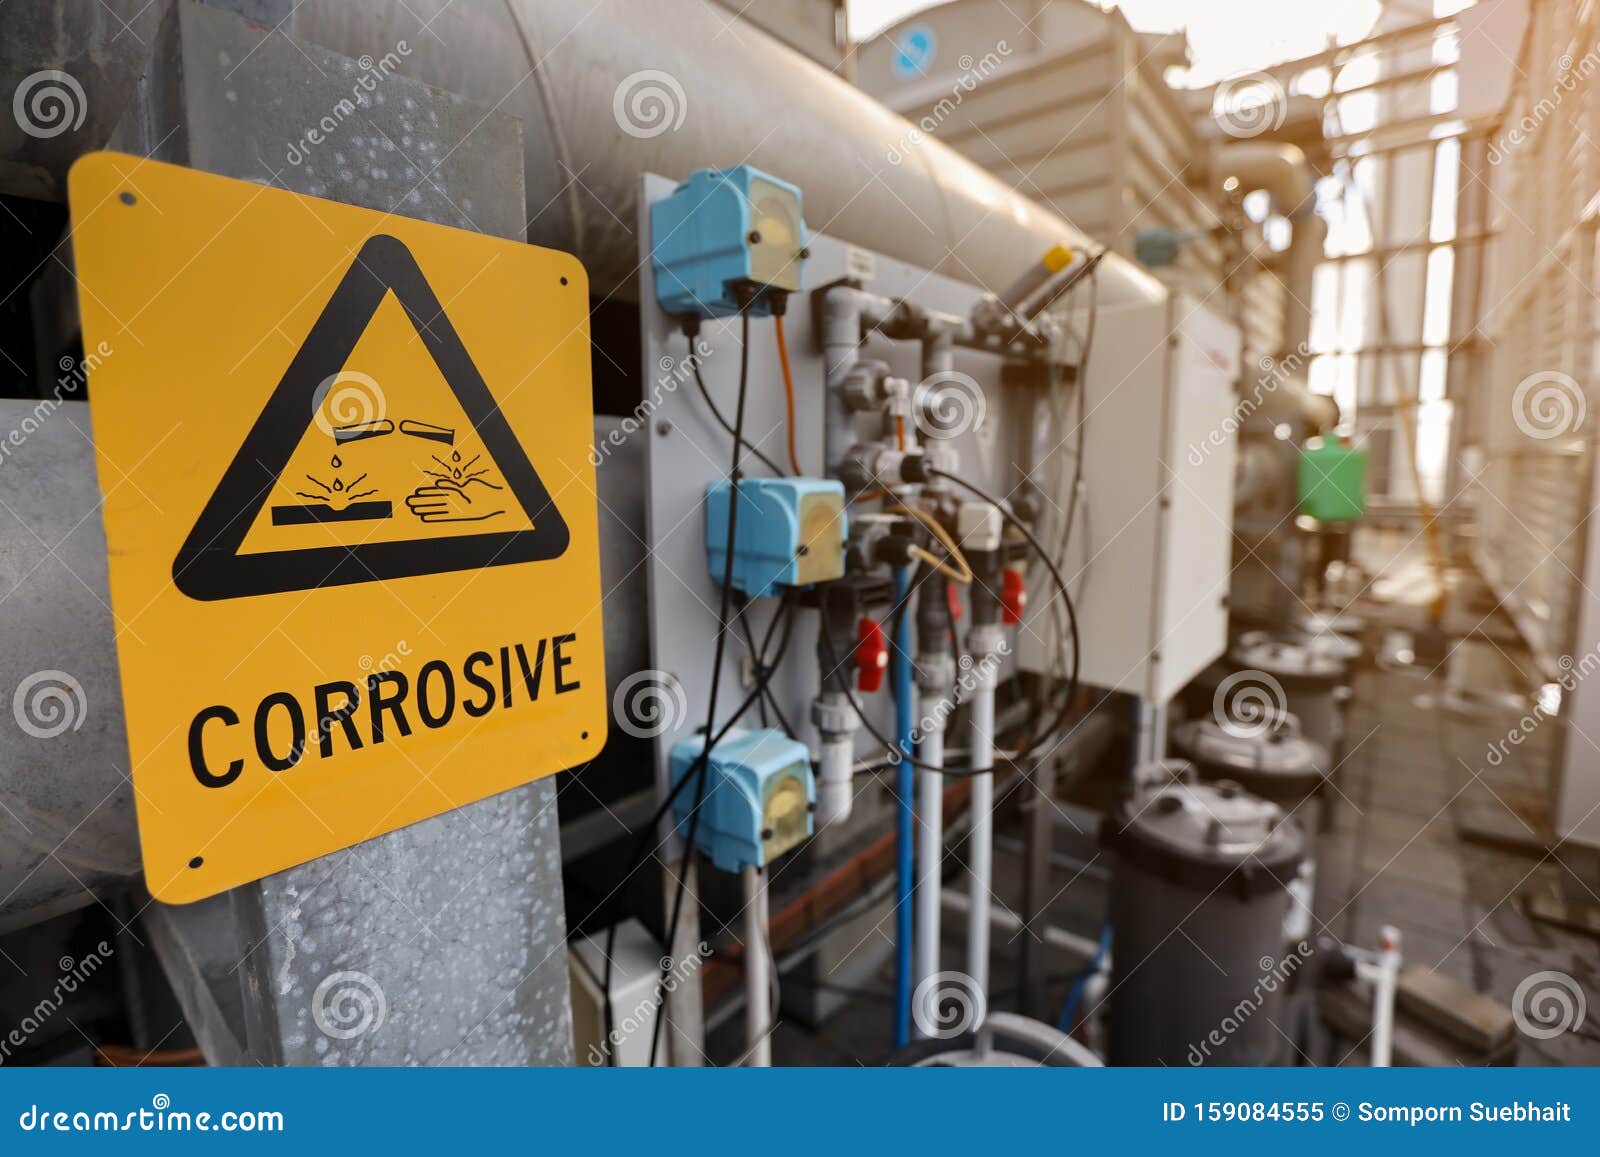 dangerous corrosive warning signs and 